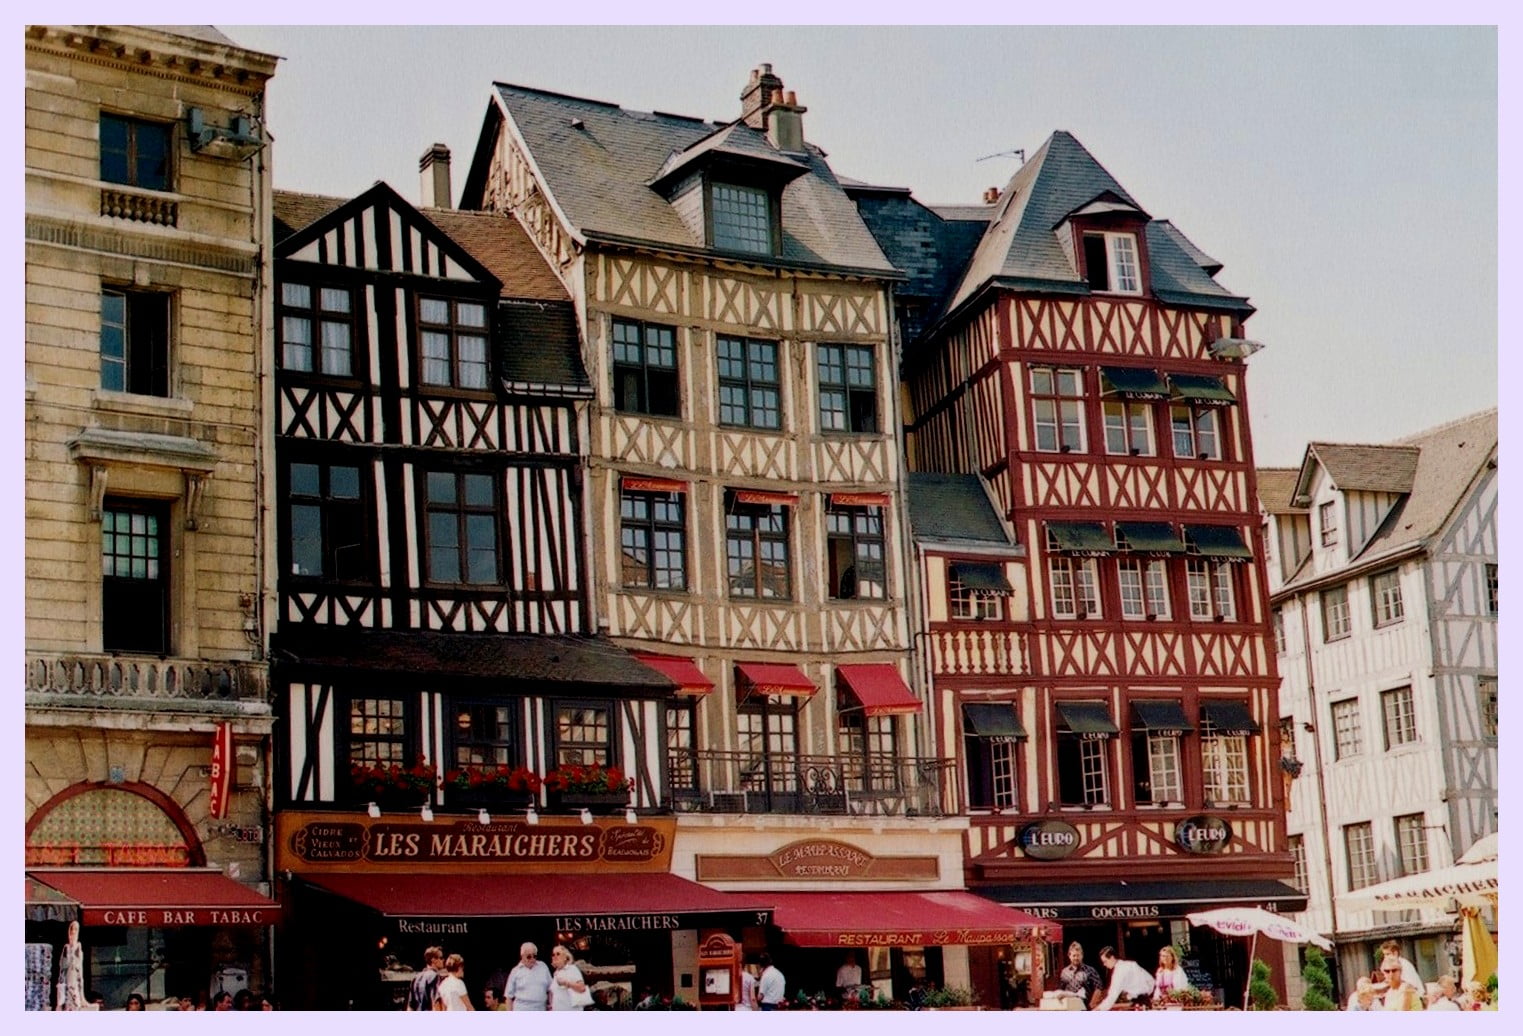 Rouen half timber houses France-Glimpses-of-the-World